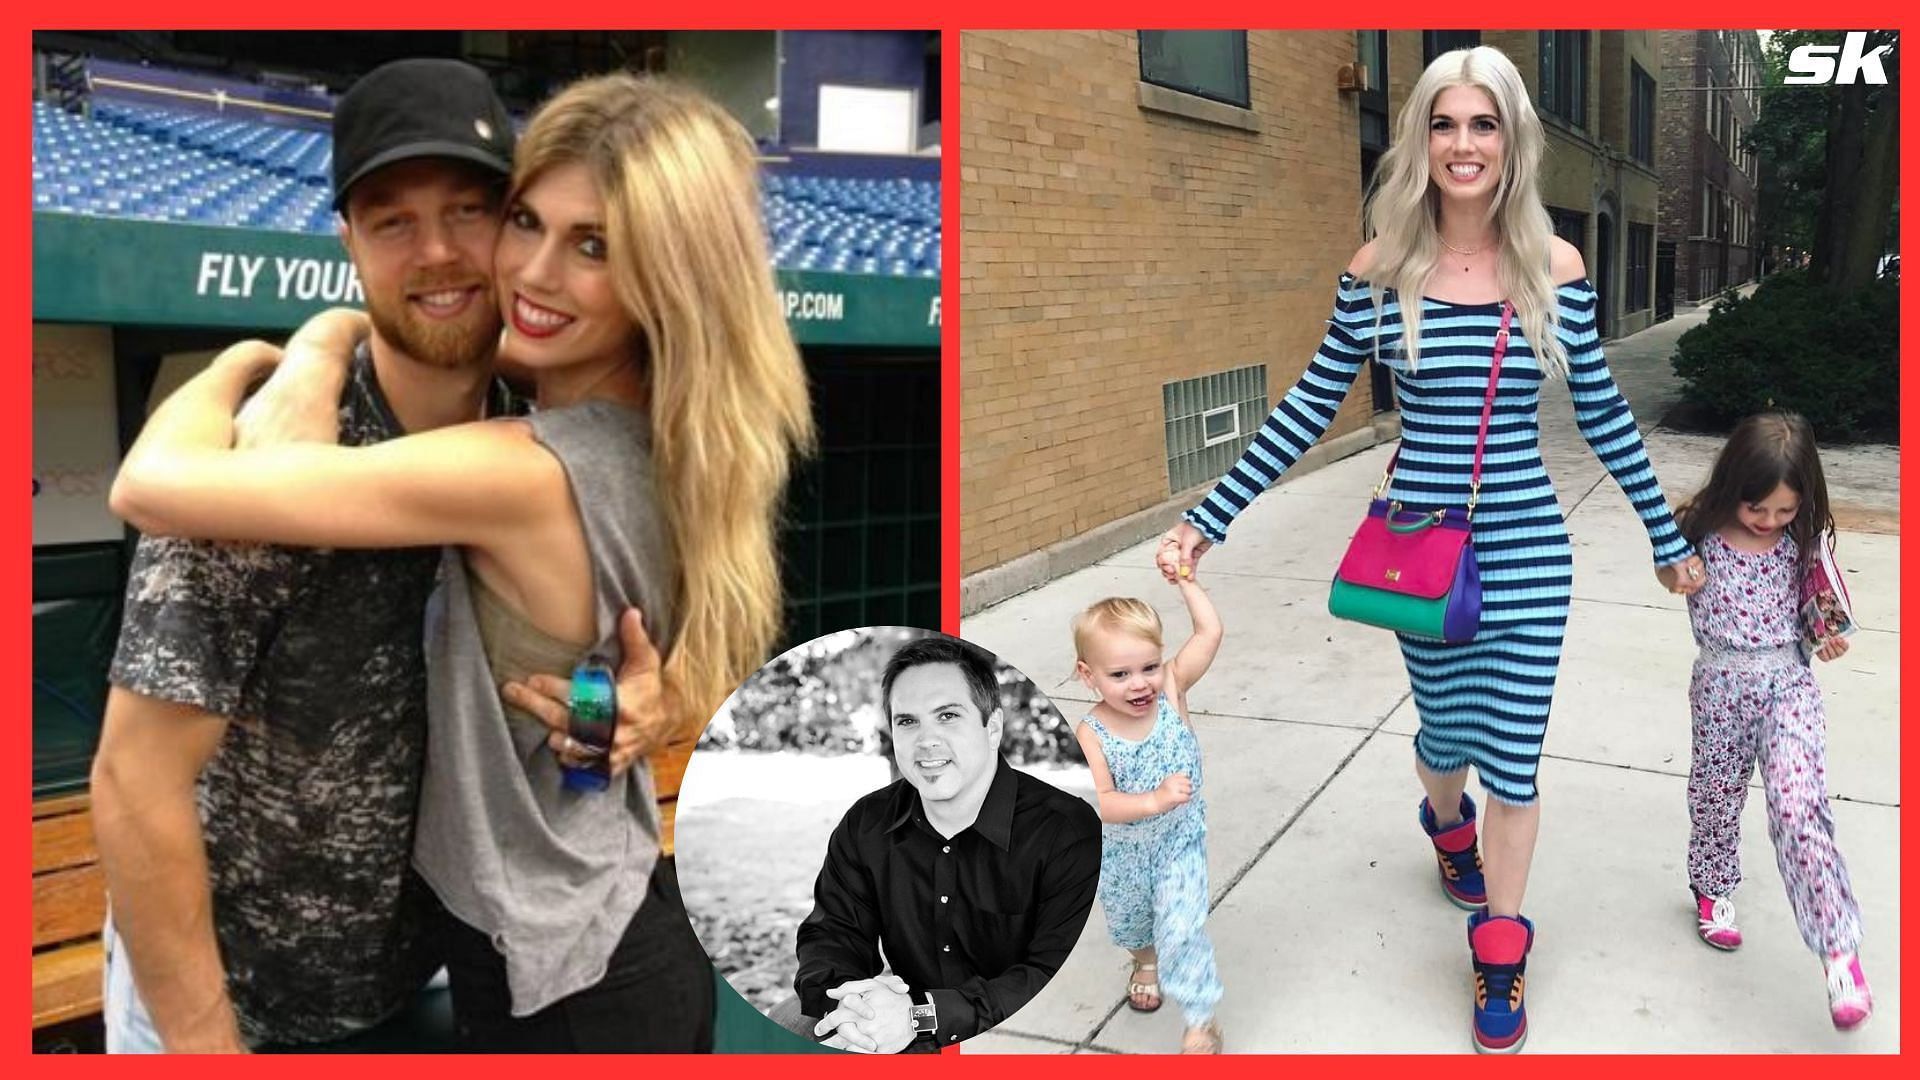 Byron Yawn manipulated Ben Zobrist into giving Julianna Zobrist space while  having affair with her